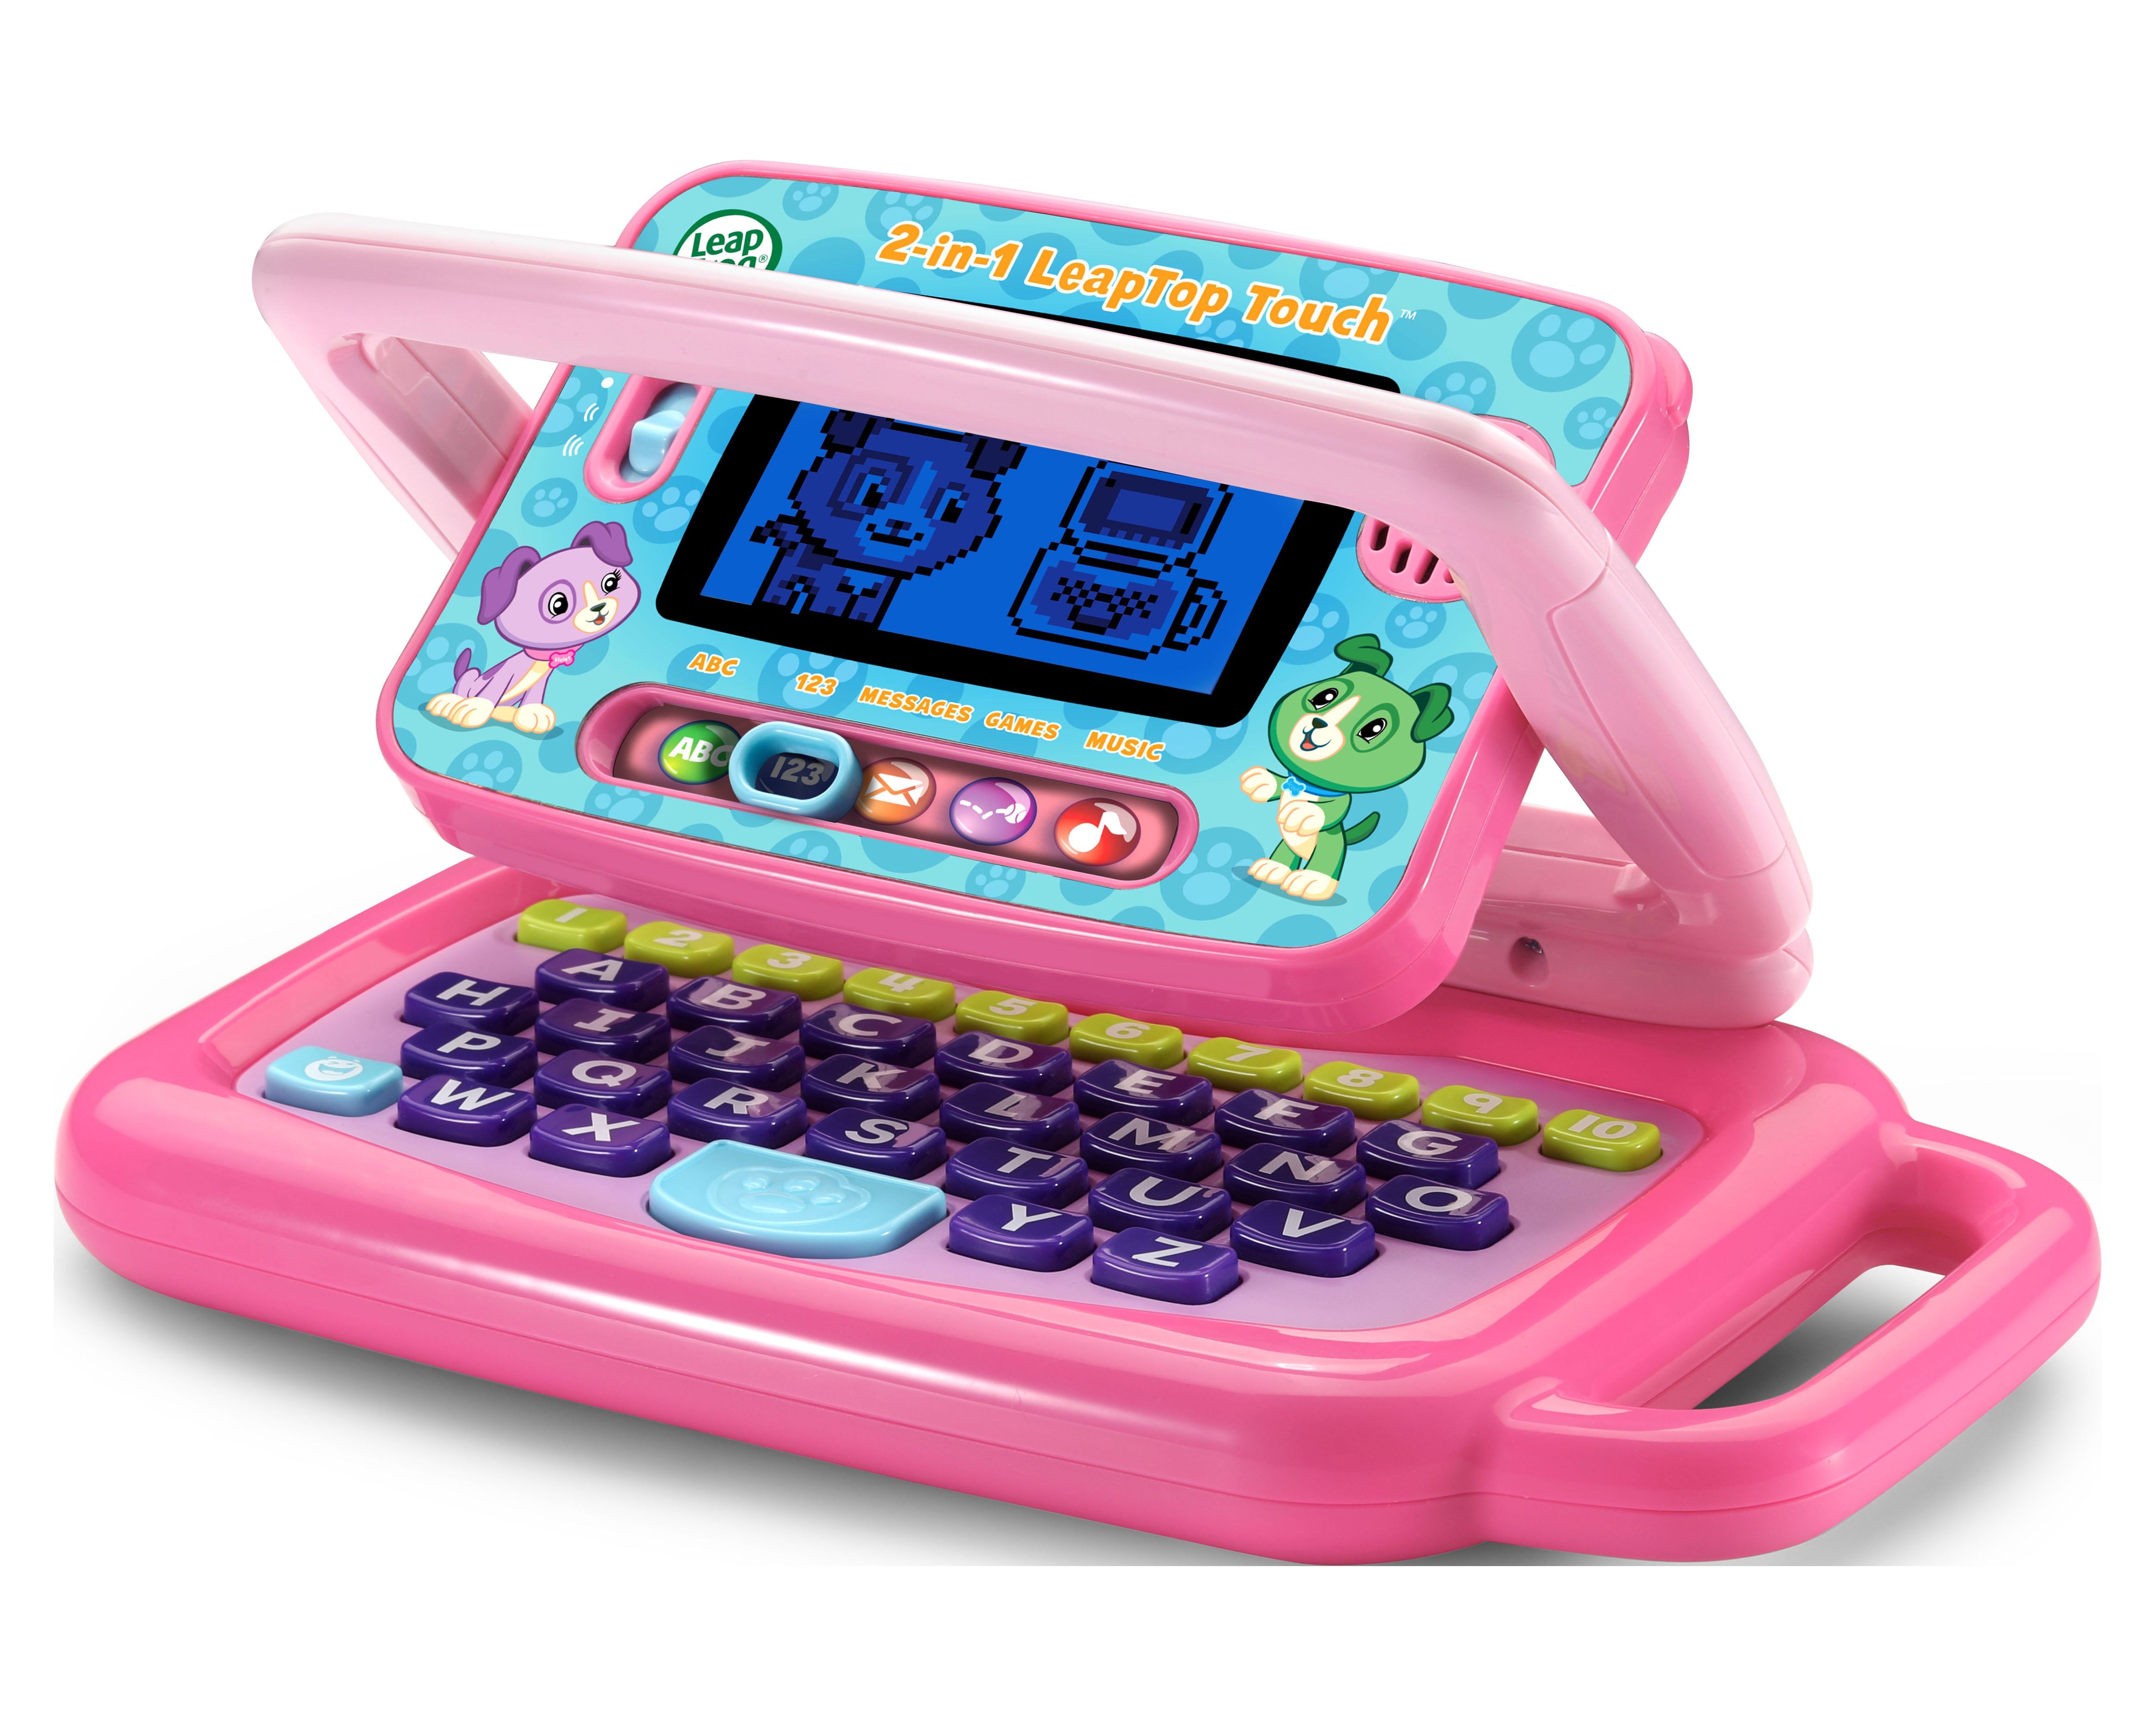 LeapFrog 2-in-1 LeapTop Touch for Toddlers, Electronic Learning System, Teaches Letters, Numbers - image 8 of 12